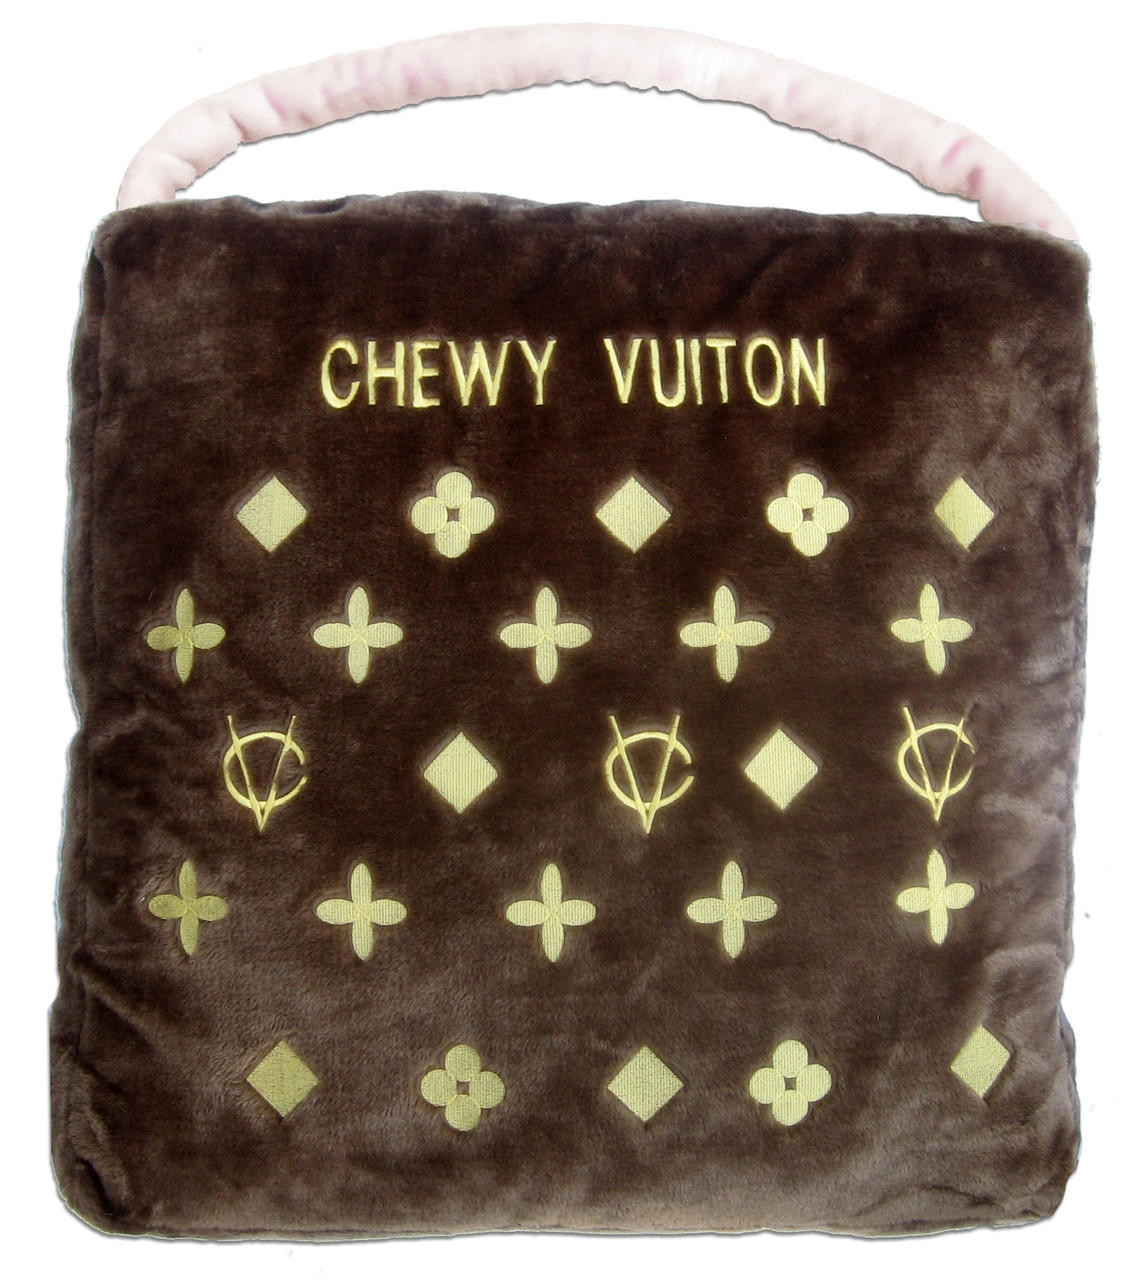 Dog Diggin Designs Chewy Vuiton Bed 